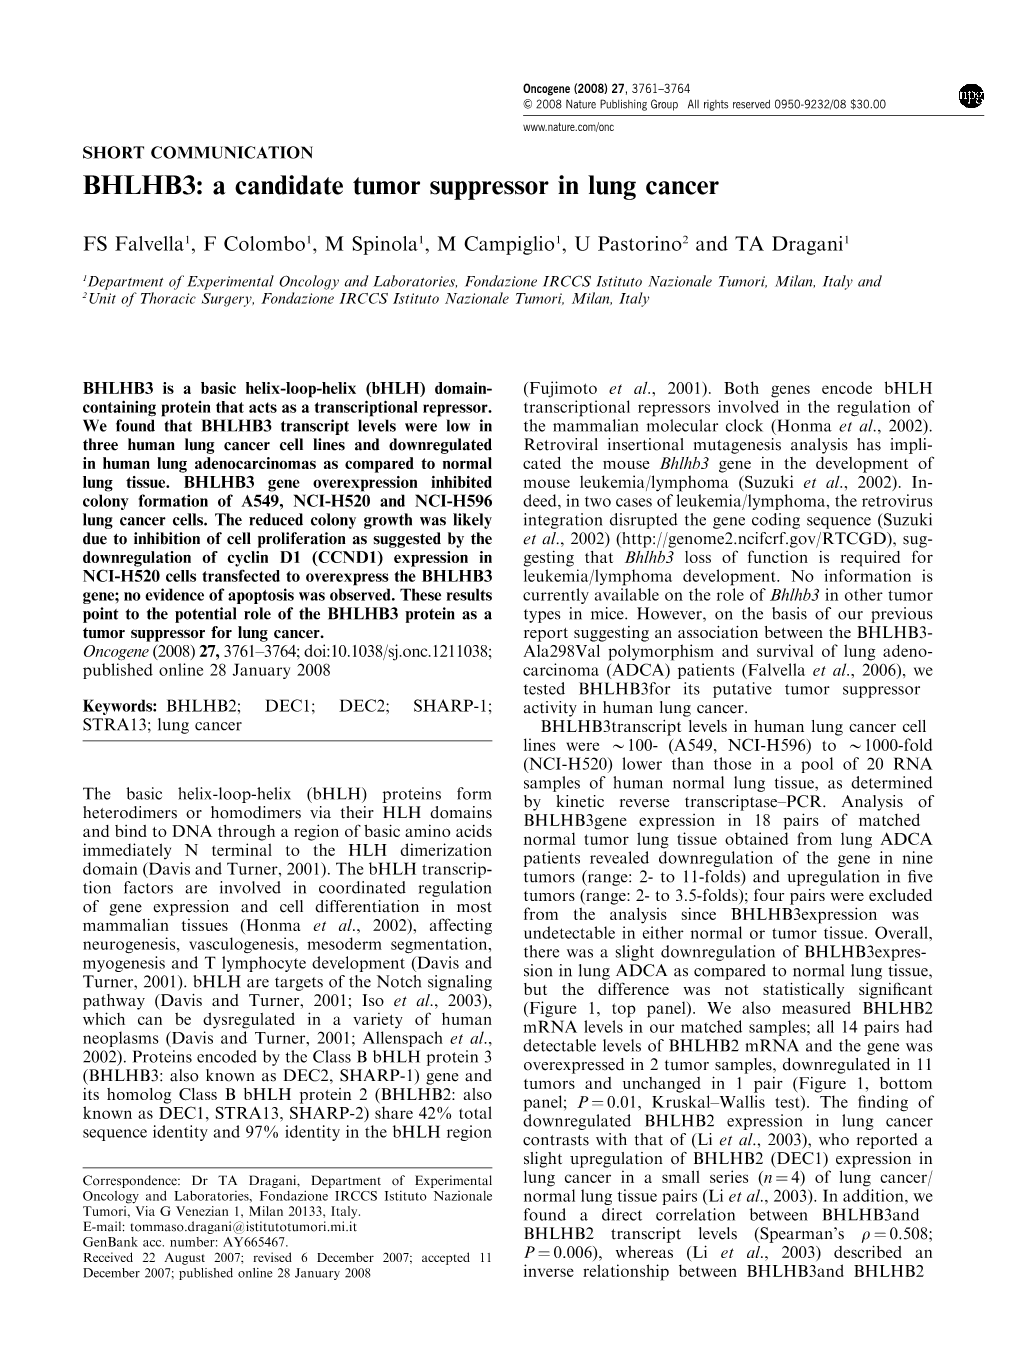 A Candidate Tumor Suppressor in Lung Cancer